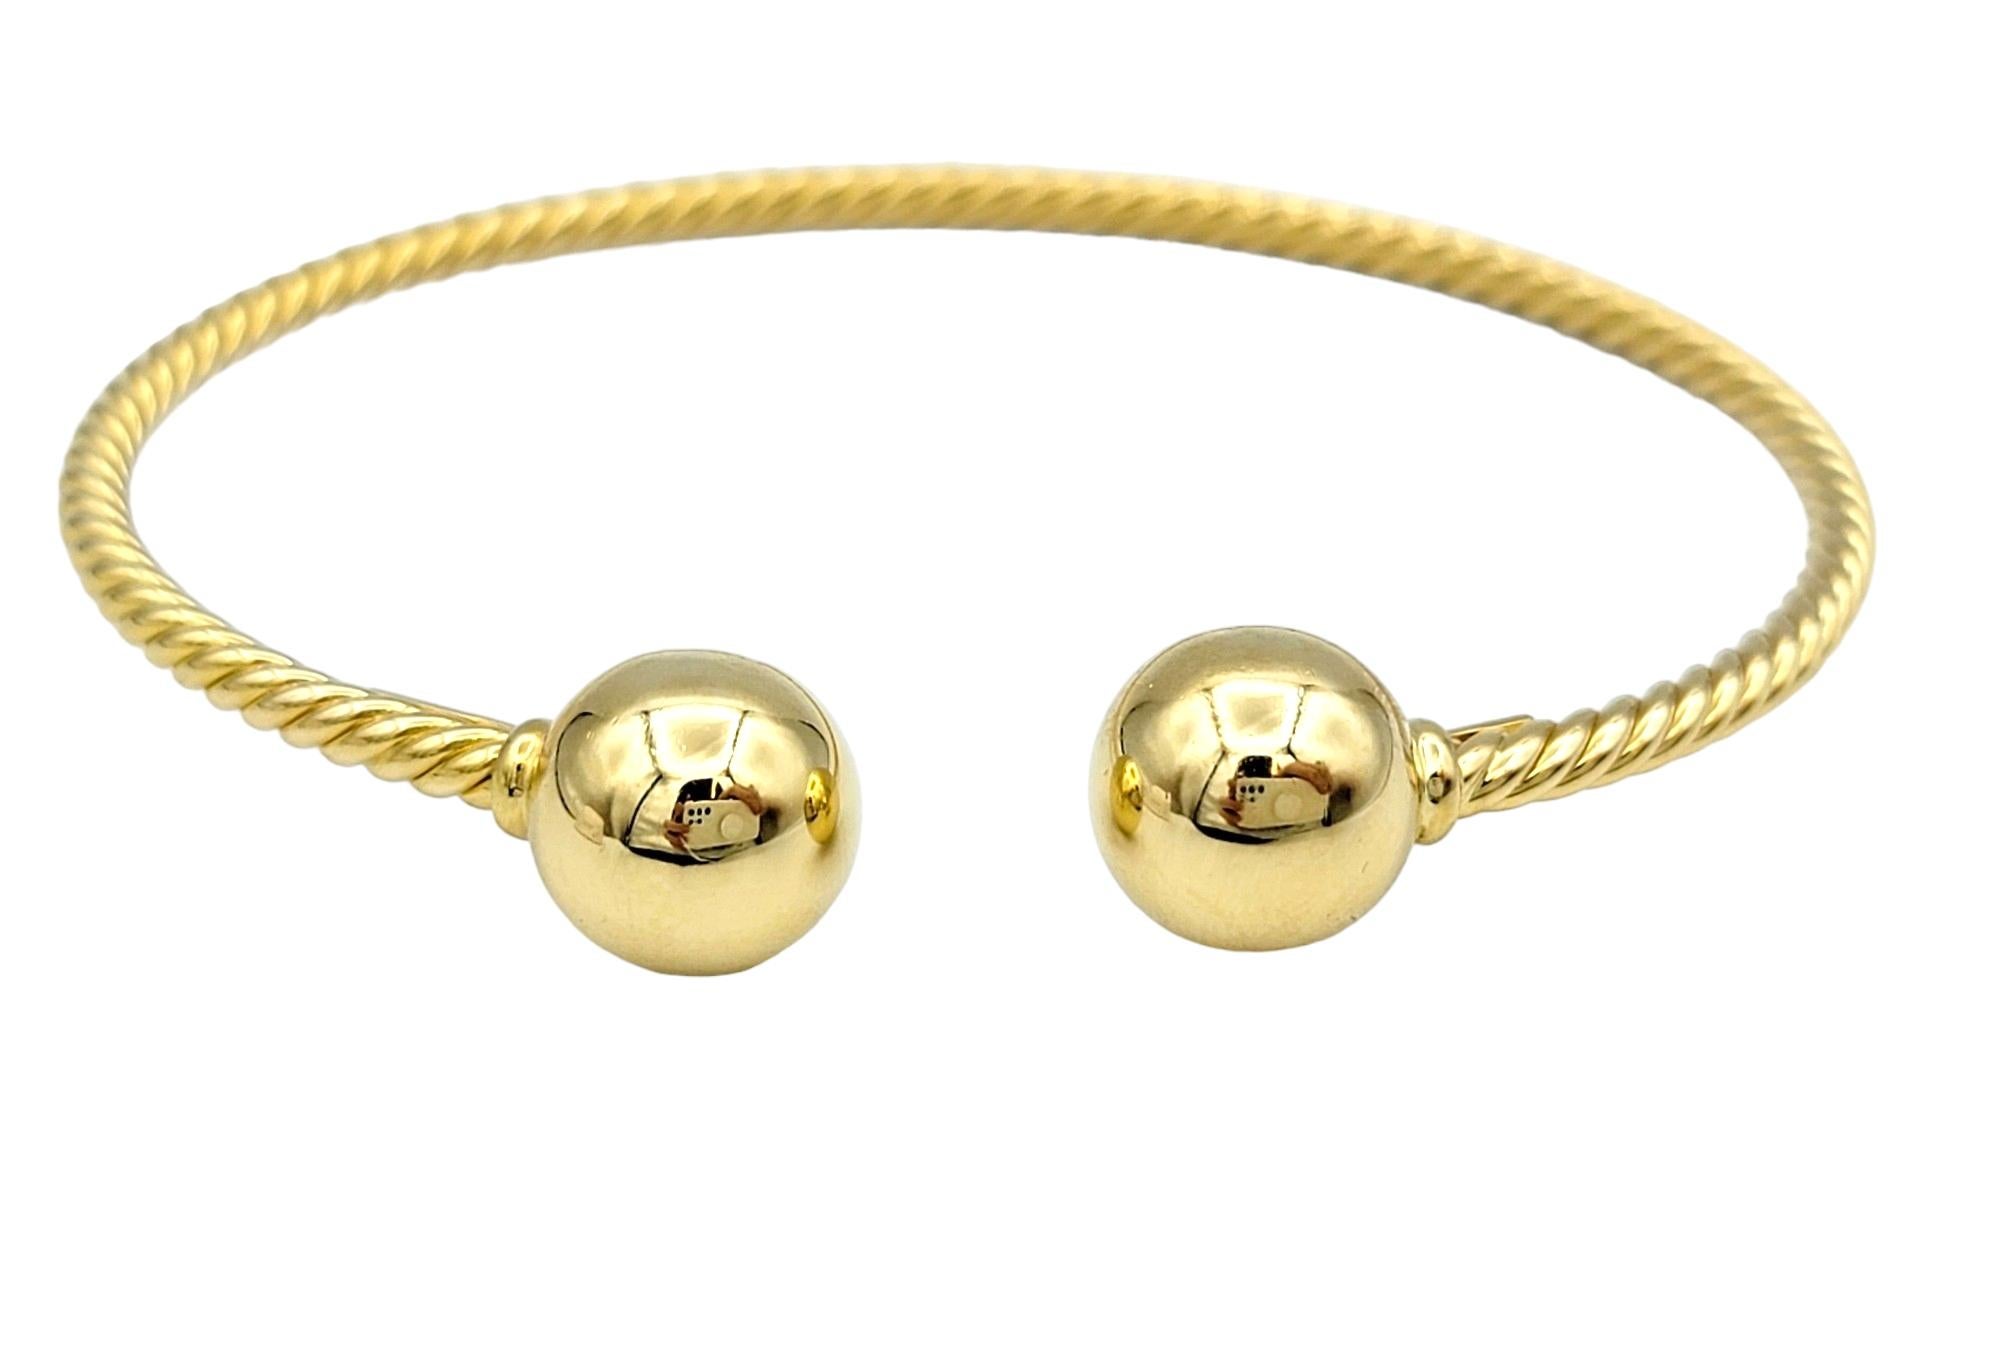 This gorgeous David Yurman cuff bracelet, crafted in lustrous 18 karat yellow gold, is a stunning example of timeless elegance and craftsmanship. Its band features a mesmerizing twisted gold pattern, adding depth and texture to the design. This